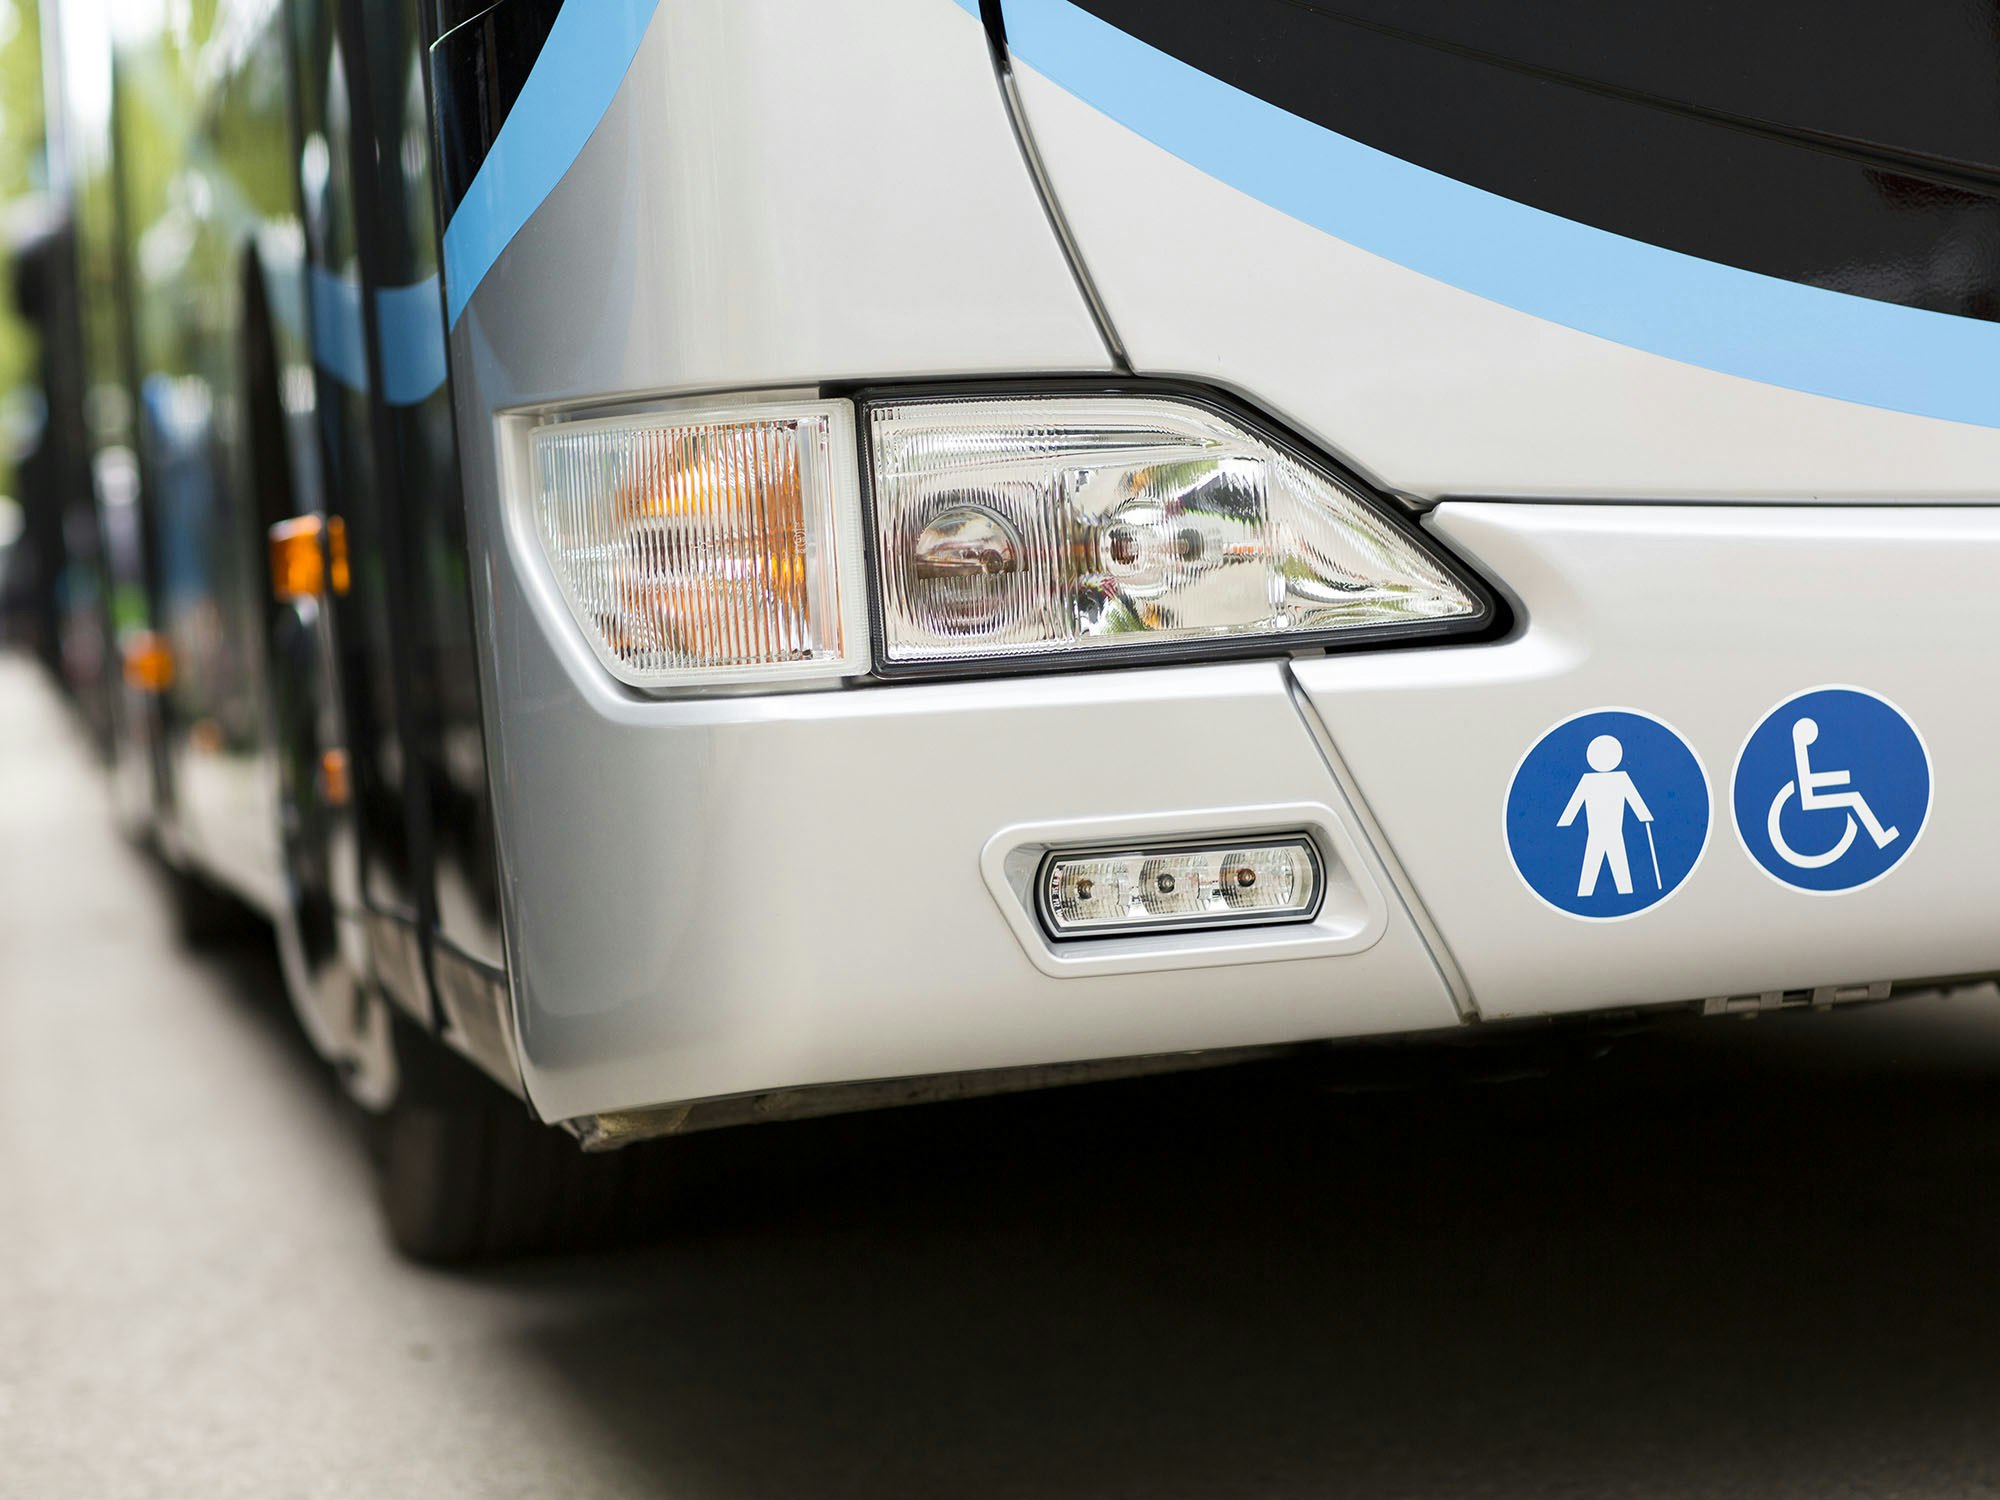 <p>The hub will help facilitate vehicle movements for people with disabilities, their drivers and carer and will provide 24-hour access to shower and change facilities. [Source: Shutterstock]</p>
